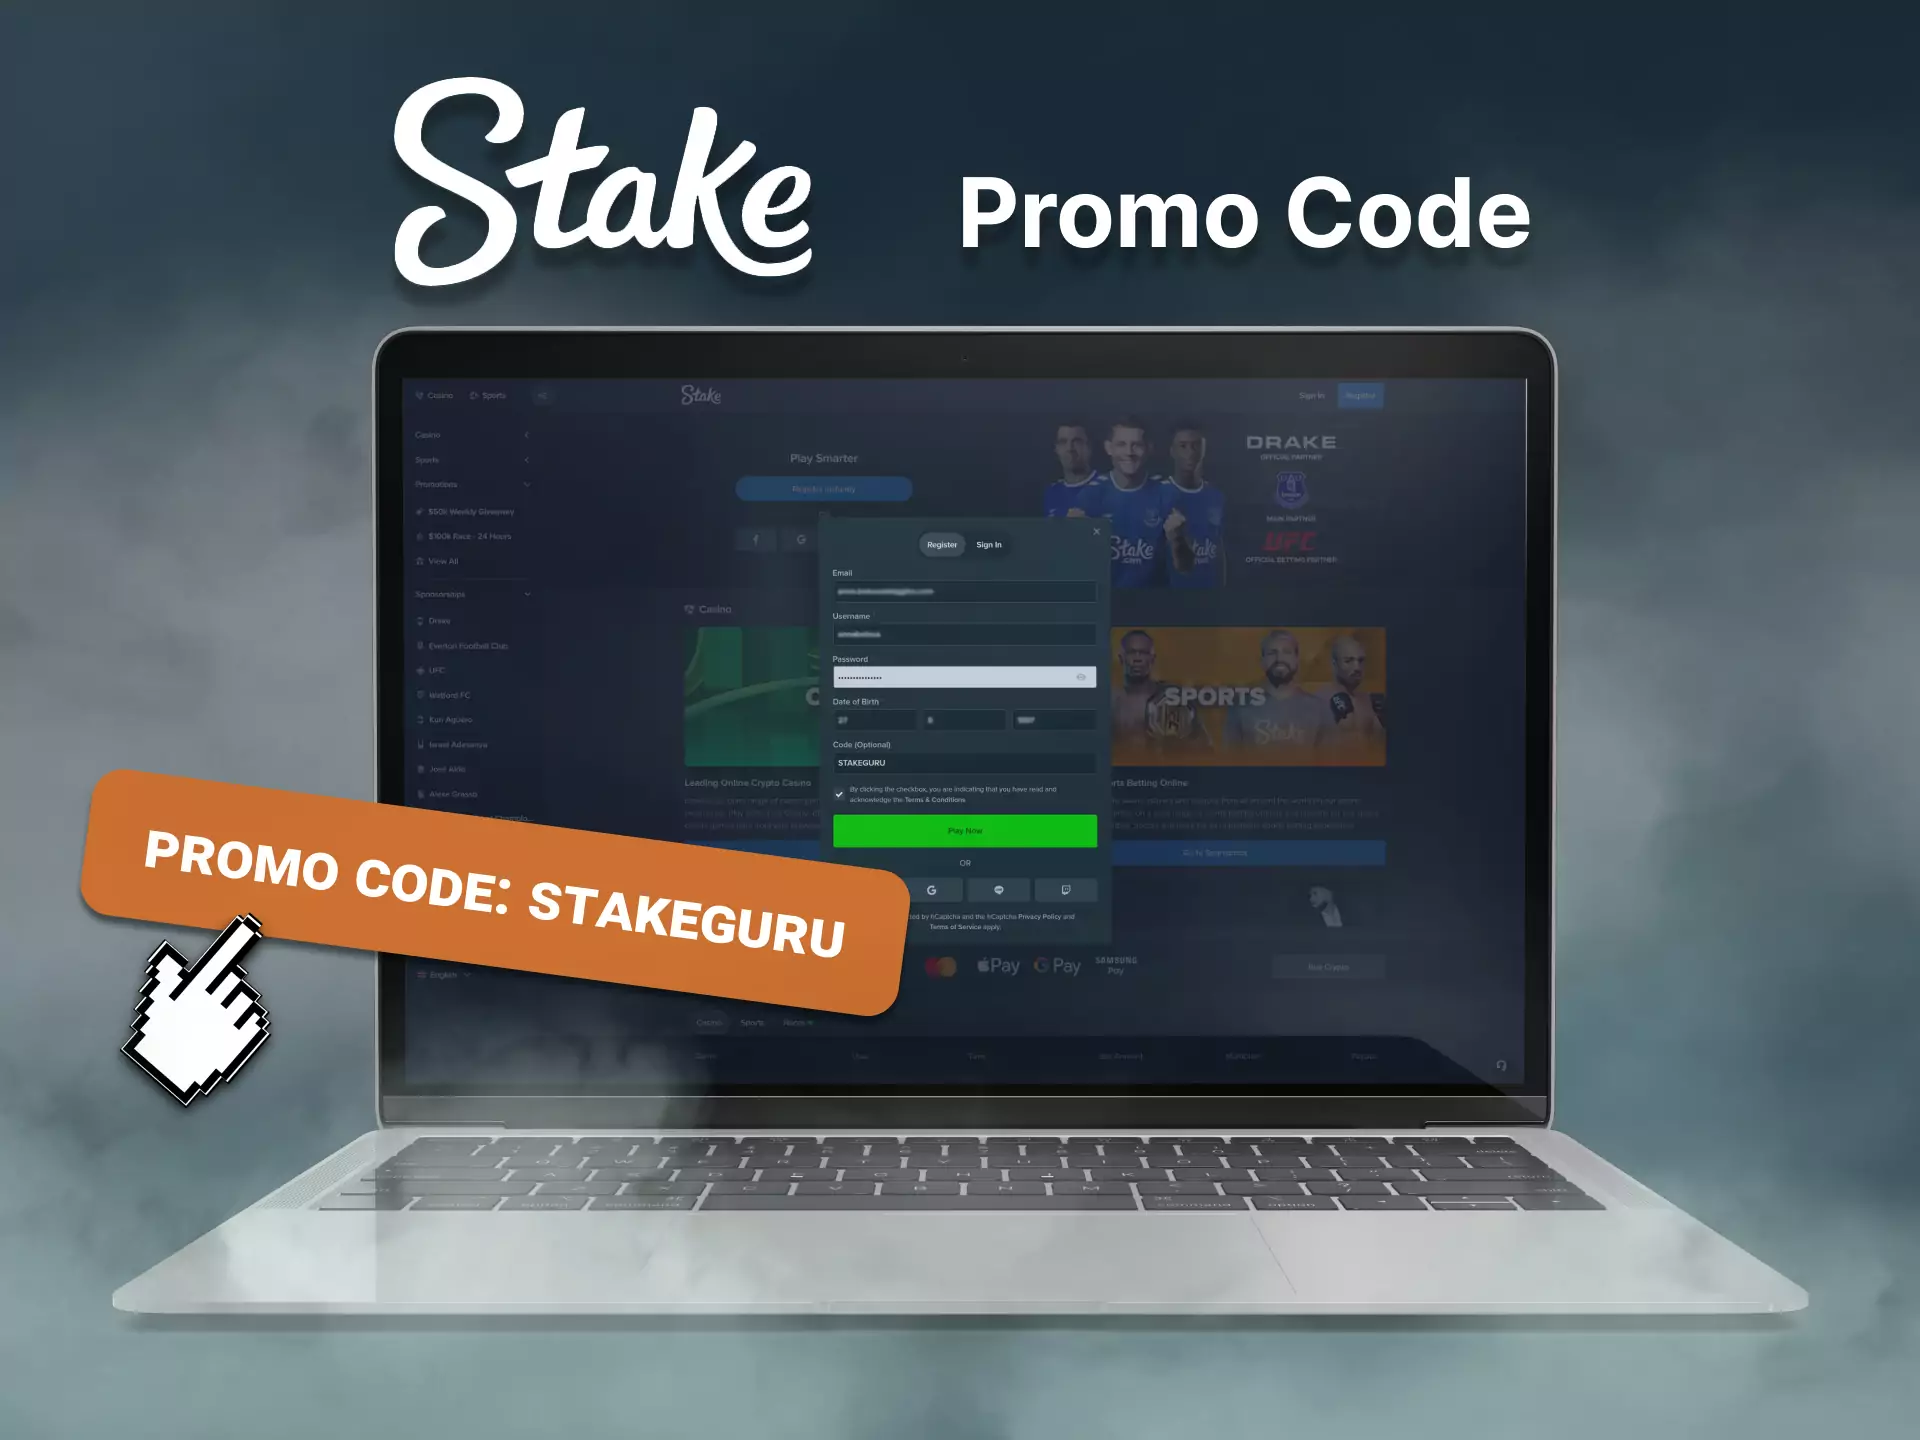 Use our promo code to get an additional bonus for betting on the Stake website.